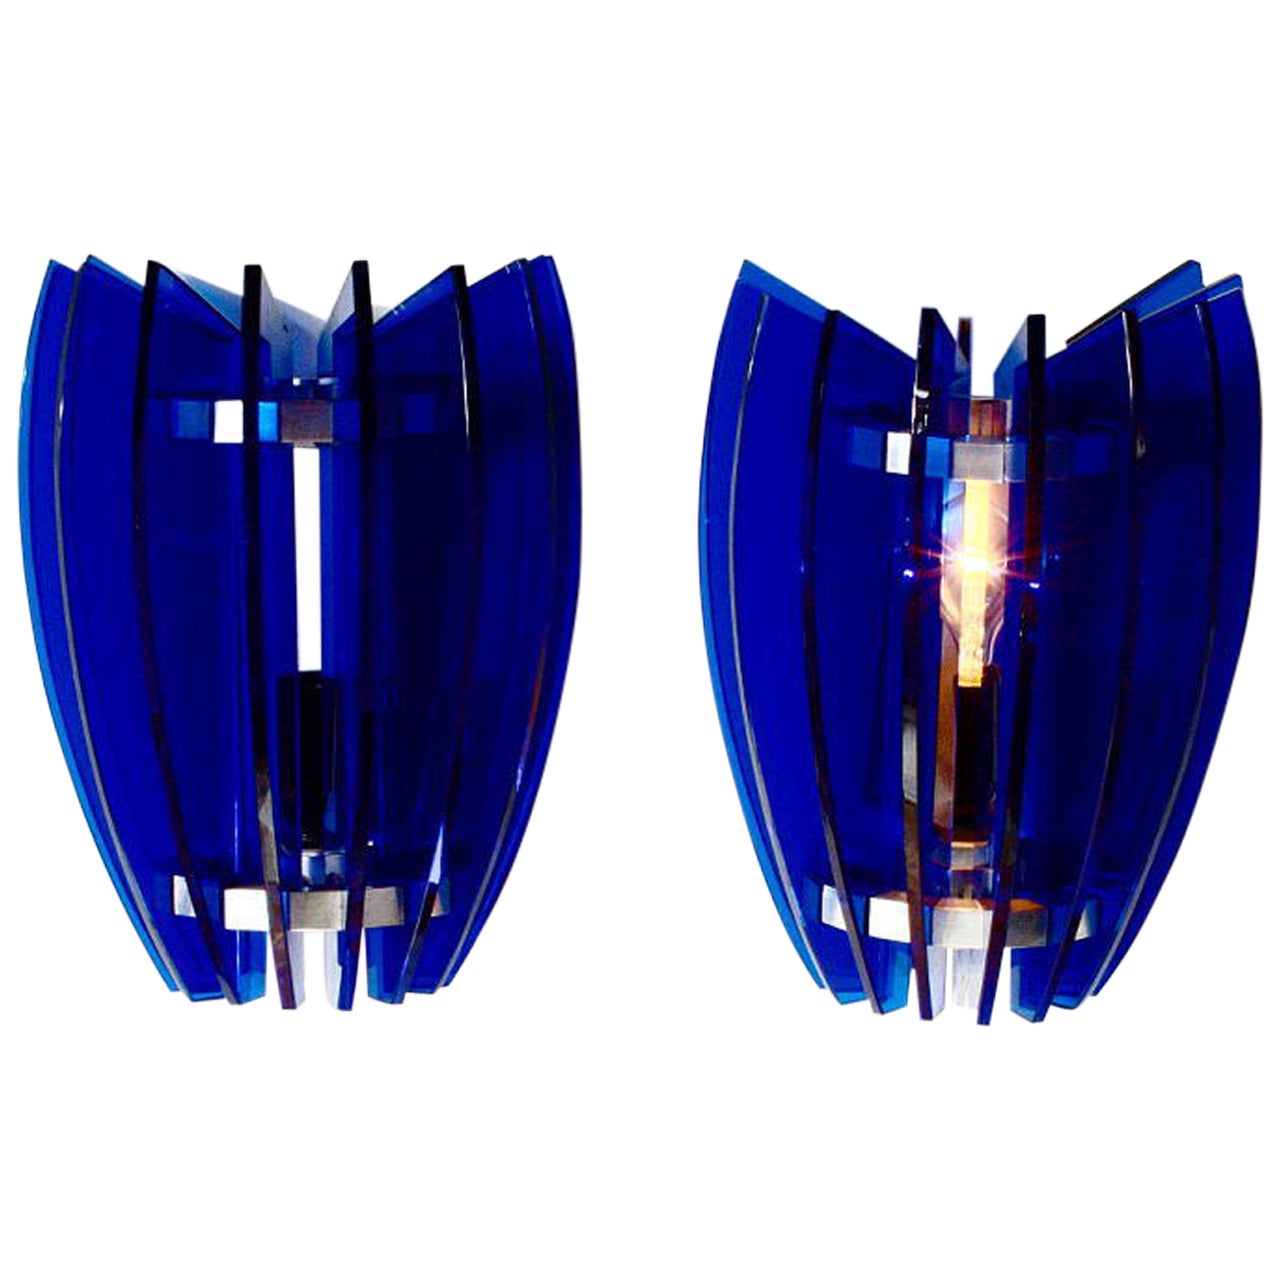 Pair of Sconces by Veca Milano in Cobalt Blue, Italy, 1970 For Sale